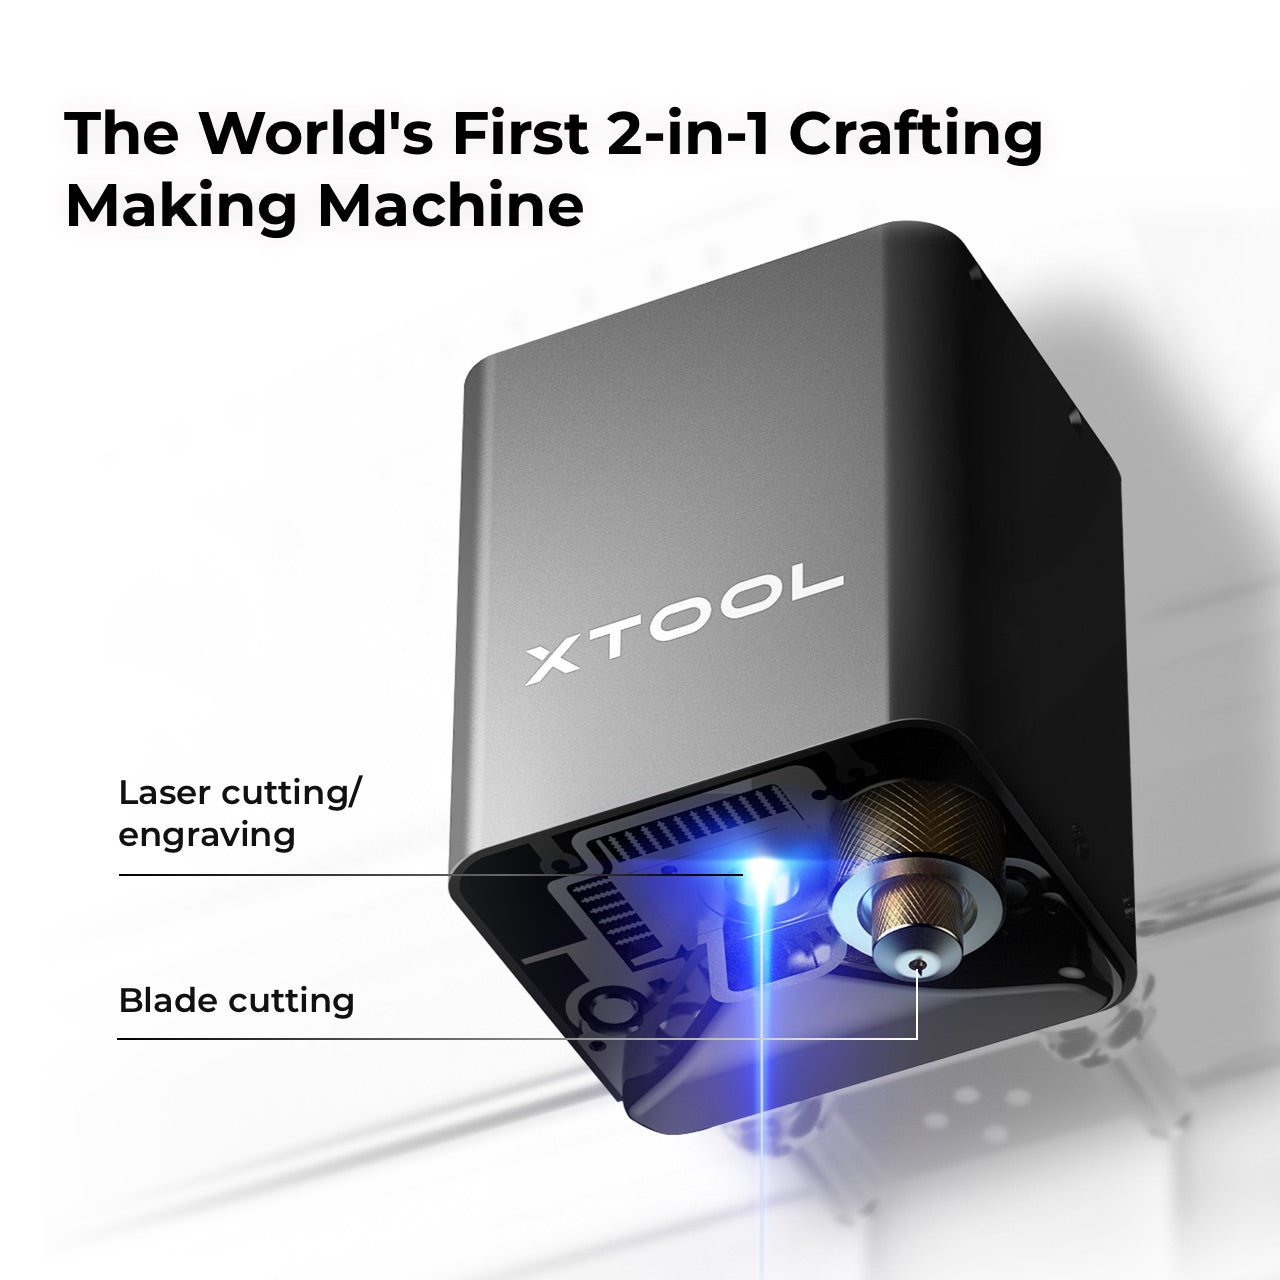 [Refurbished] xTool M1 10W Smart 2-in-1 Laser Engraver and Vinyl Cutter